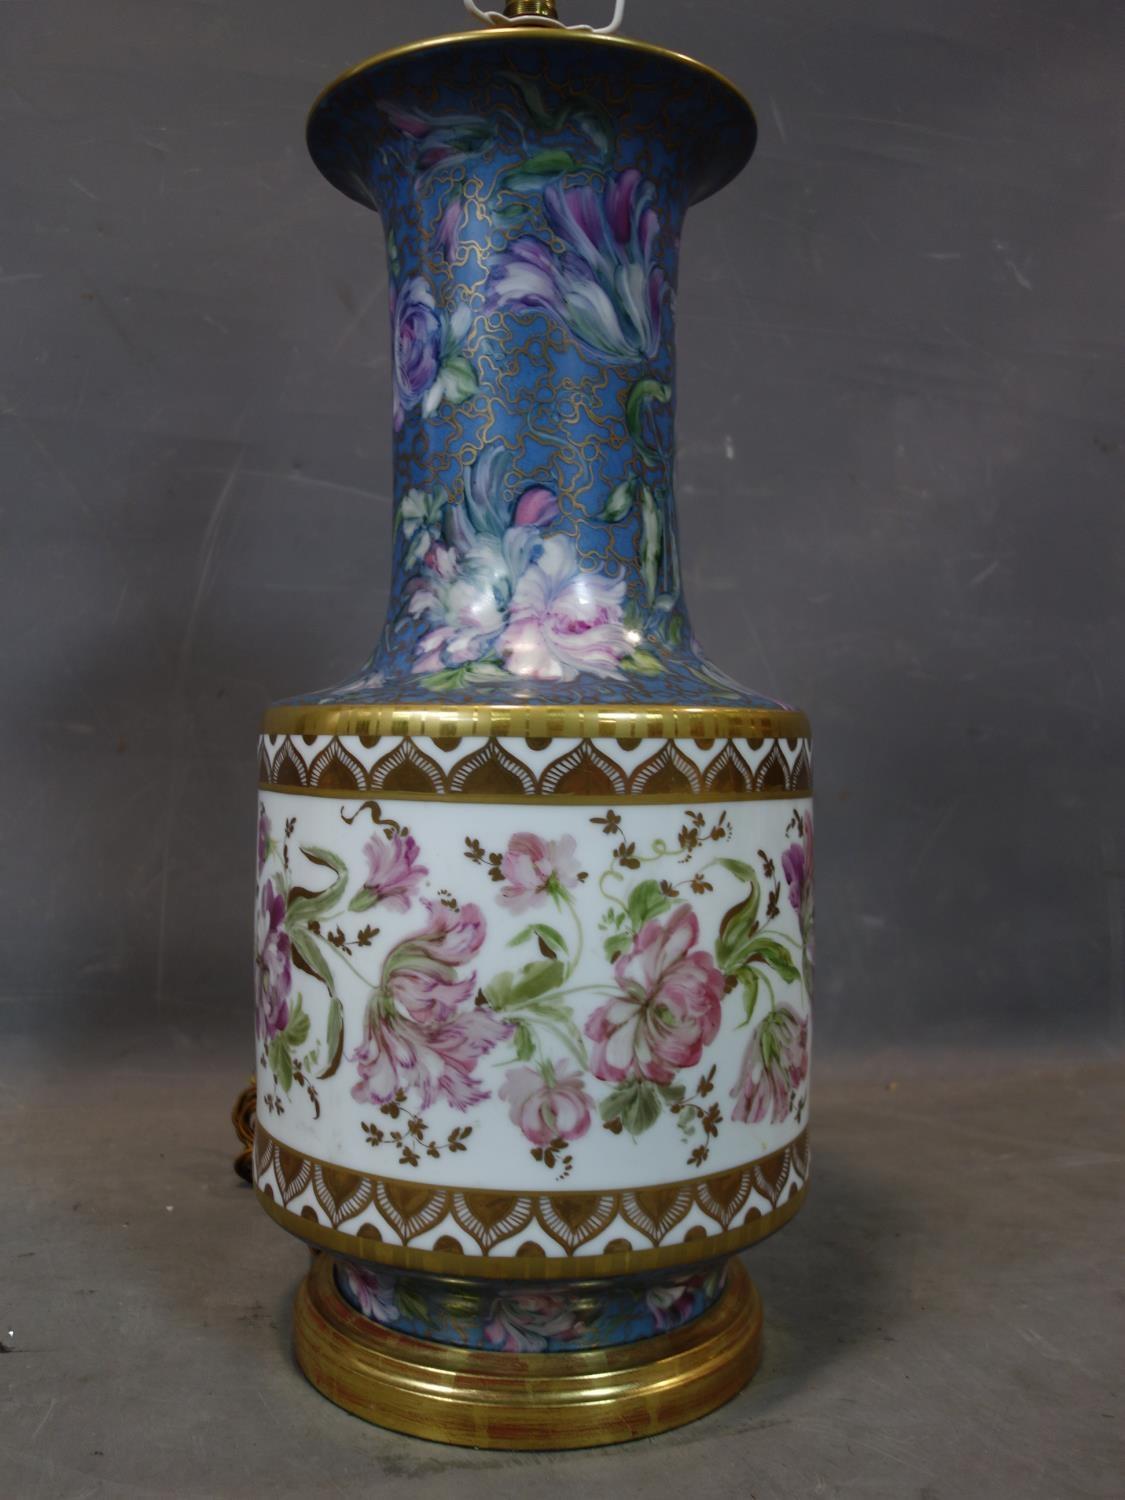 A large 20th century porcelain lamp, hand painted with flowers and gilt, possibly by Limoges, with - Image 3 of 3